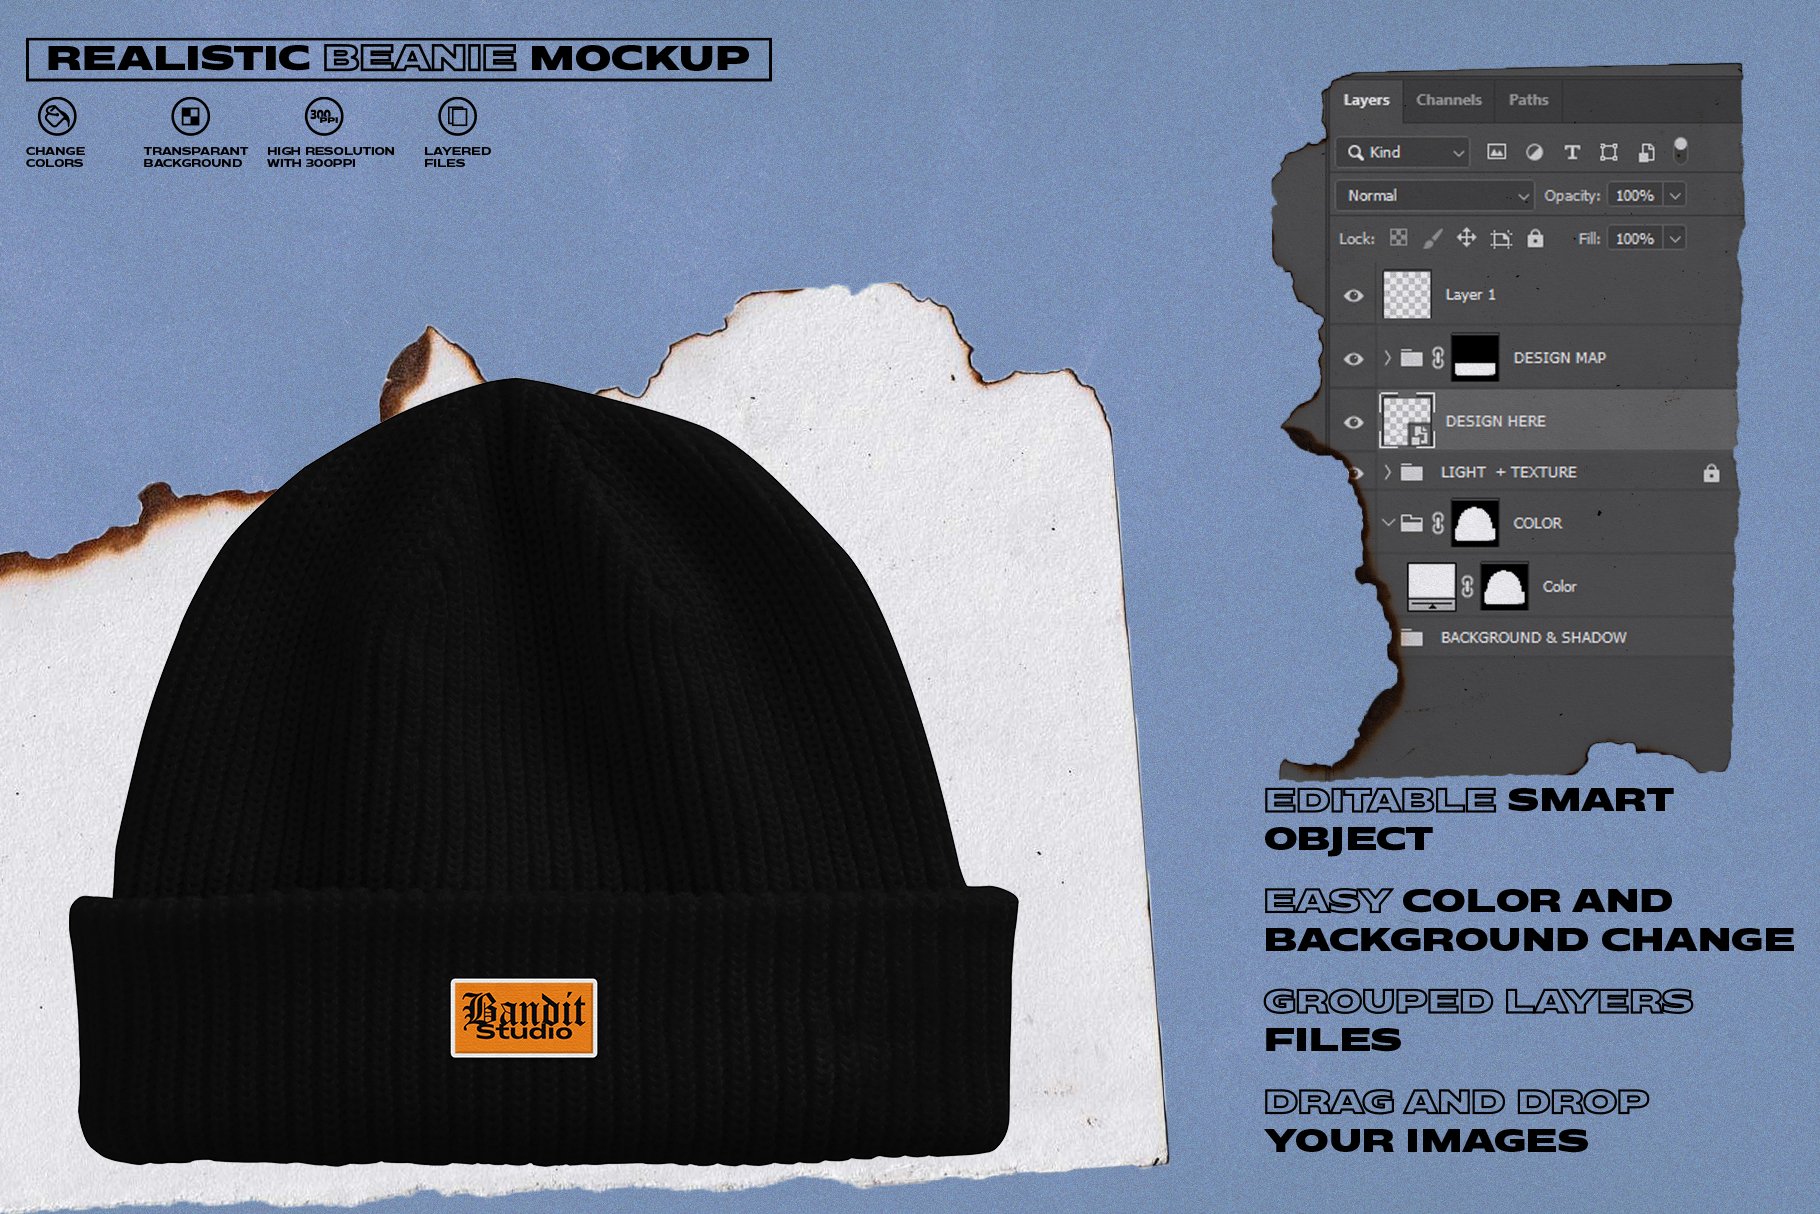 Realistic Beanie Mockup cover image.